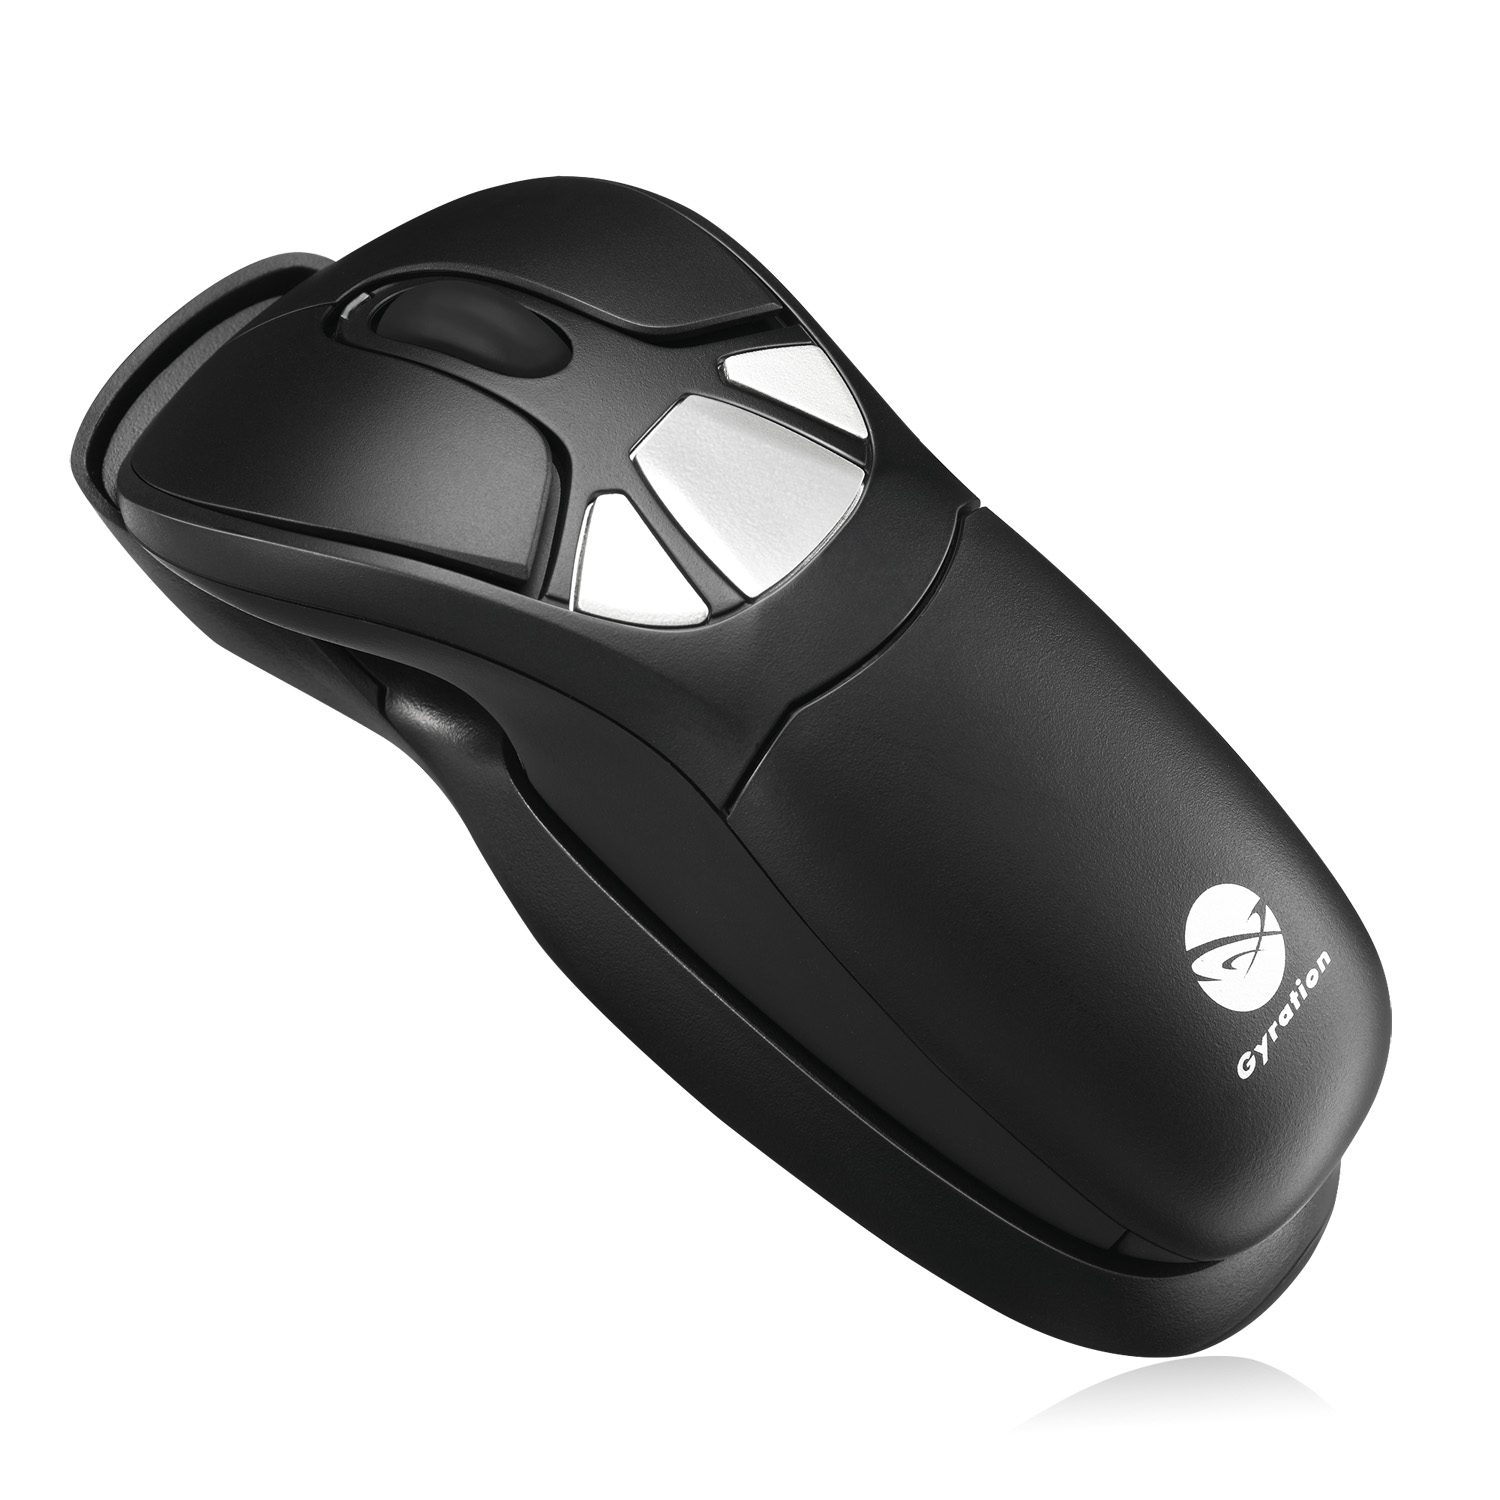 NEW DRIVER: GYRATION GC15M MOUSE